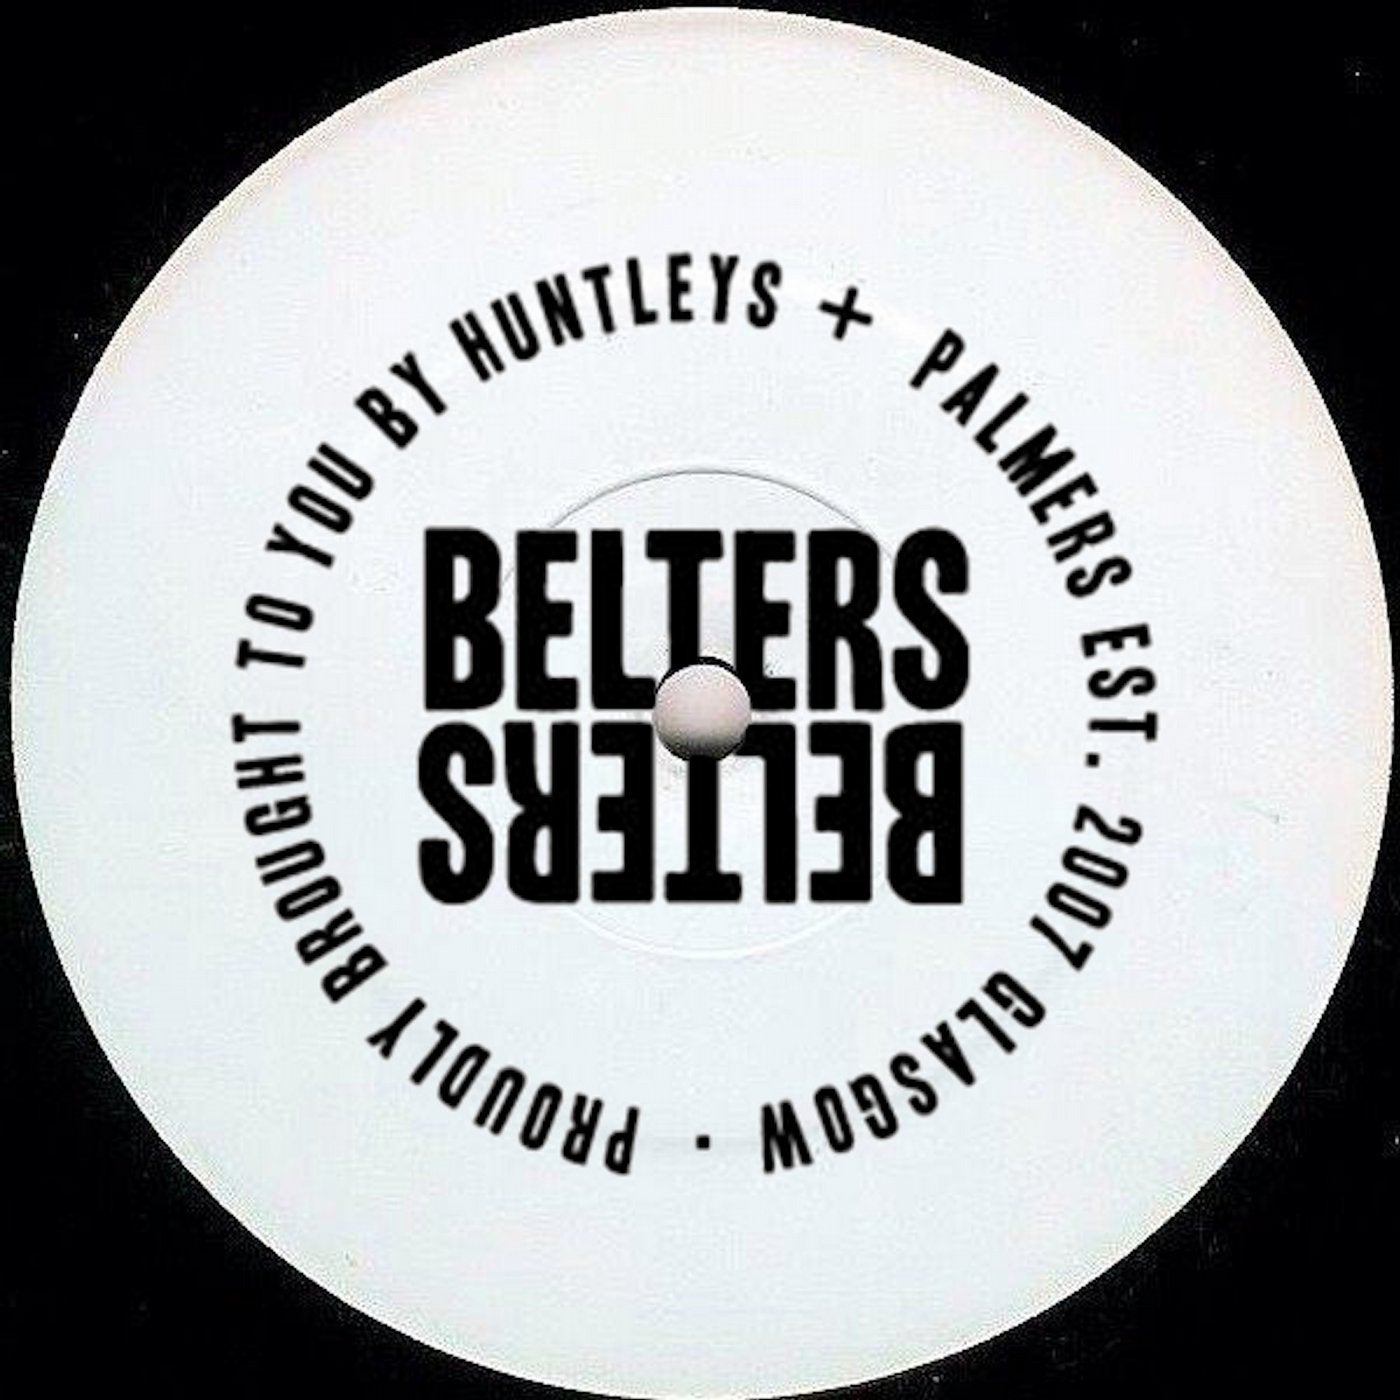 Bostro's Belters